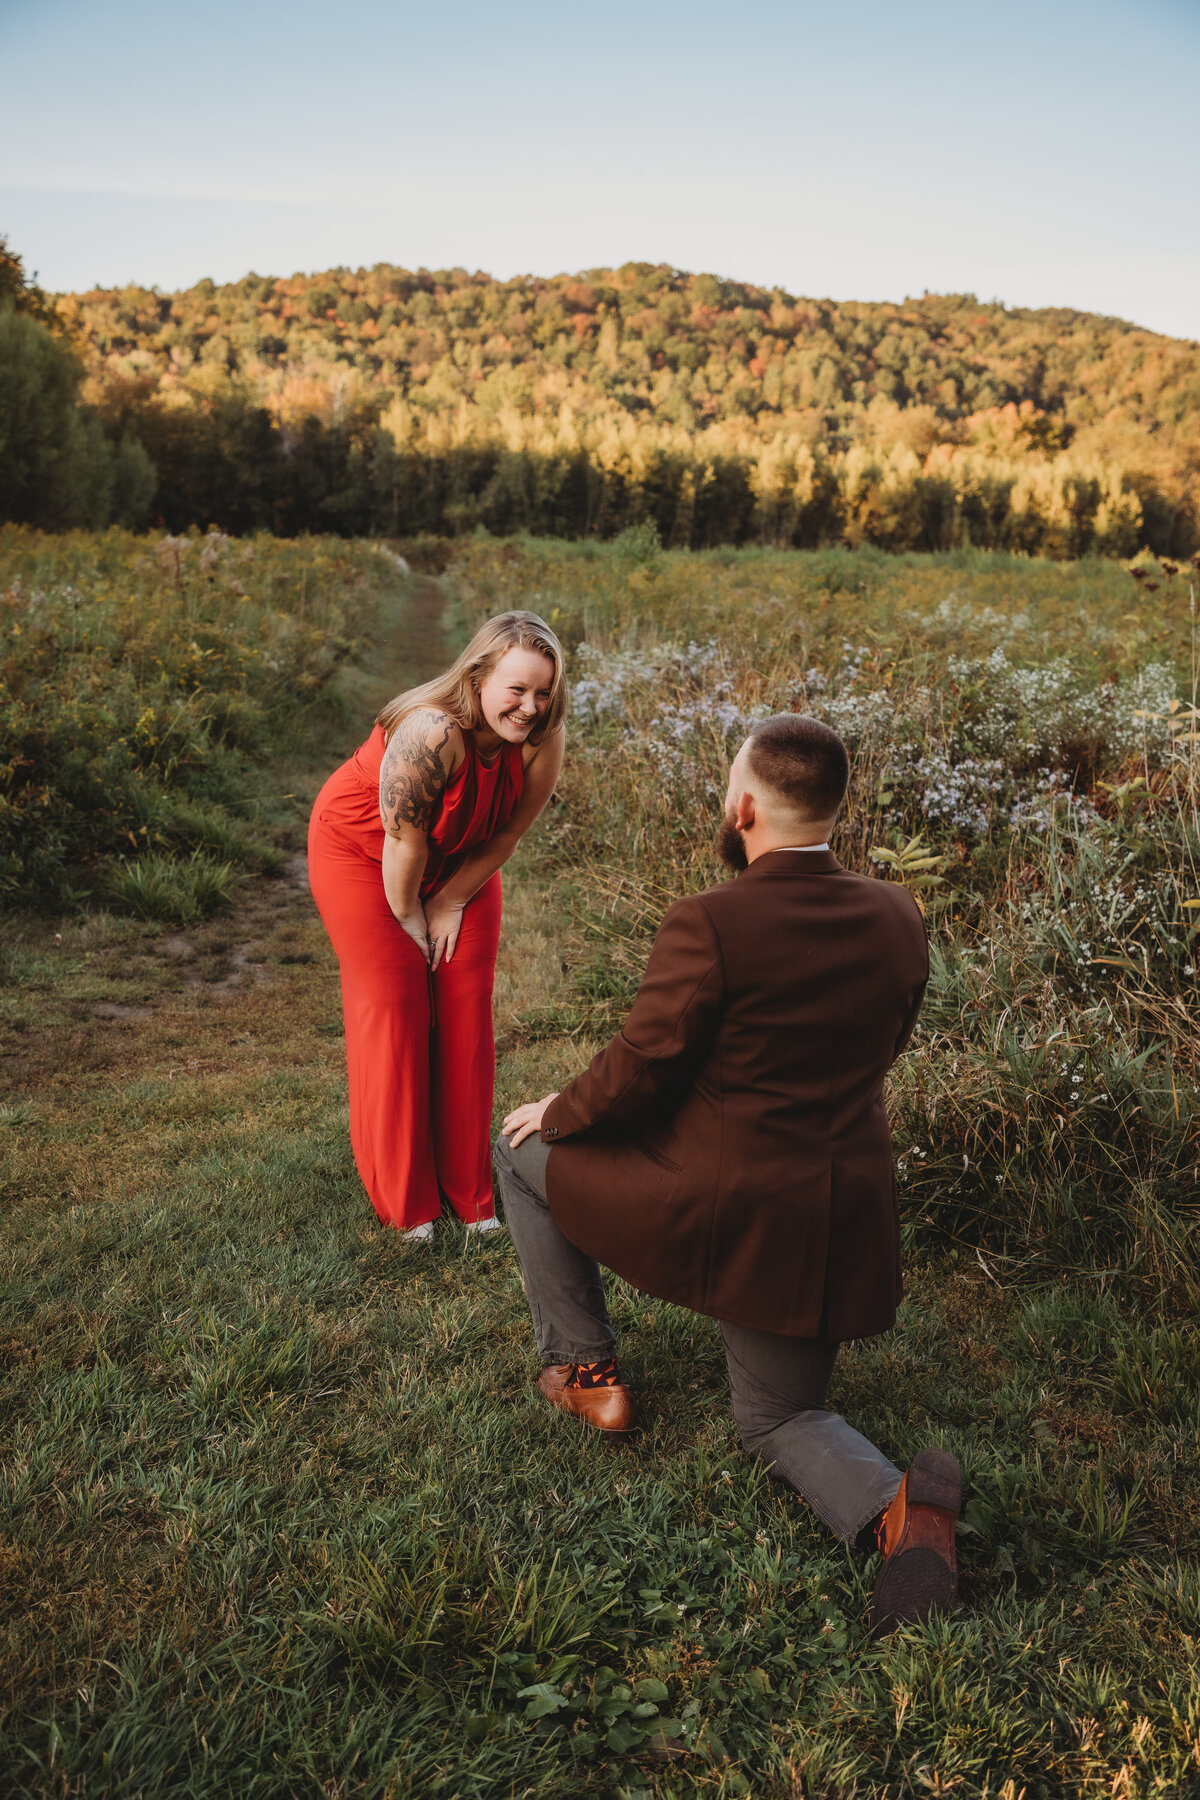 A couple surrounded by Vermont's vibrant fall foliage, reflecting the season of change and love.